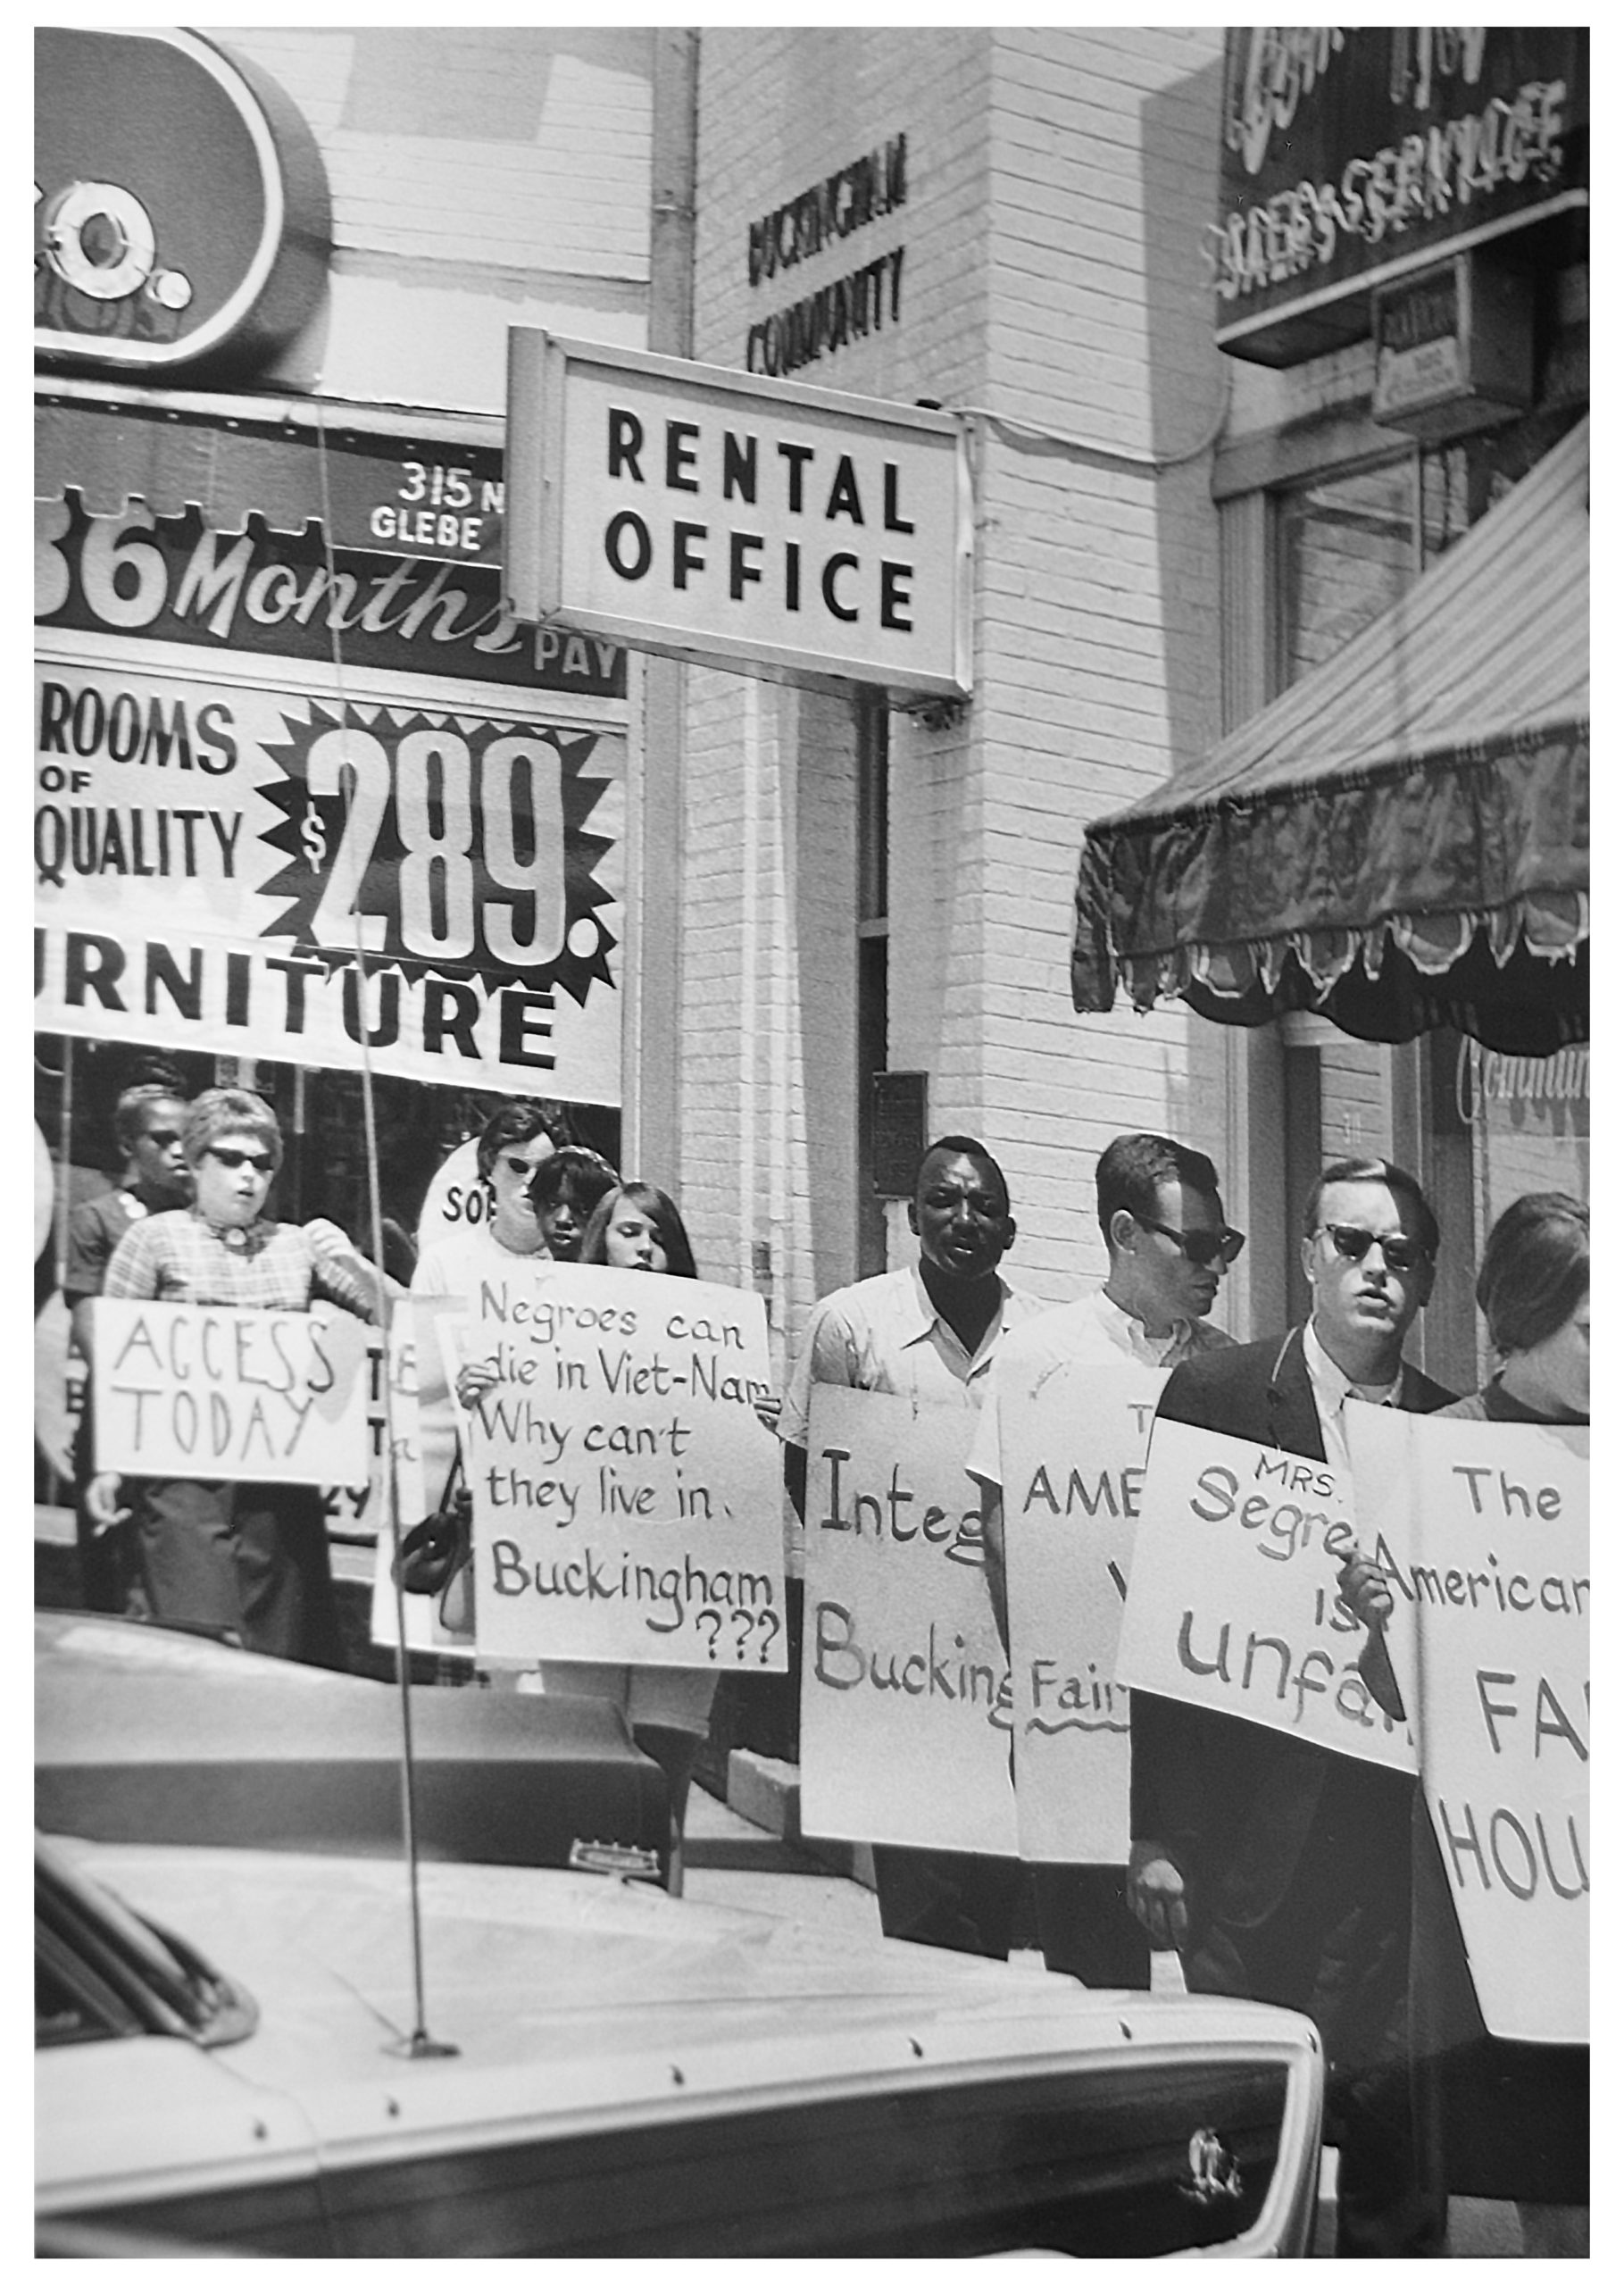 Civil rights demonstrators parade outside the rental office of Buckingham Apartments on June 9, 1966, demanding fair access to rental property. DC Public Library, Star Collection © Washington Post.